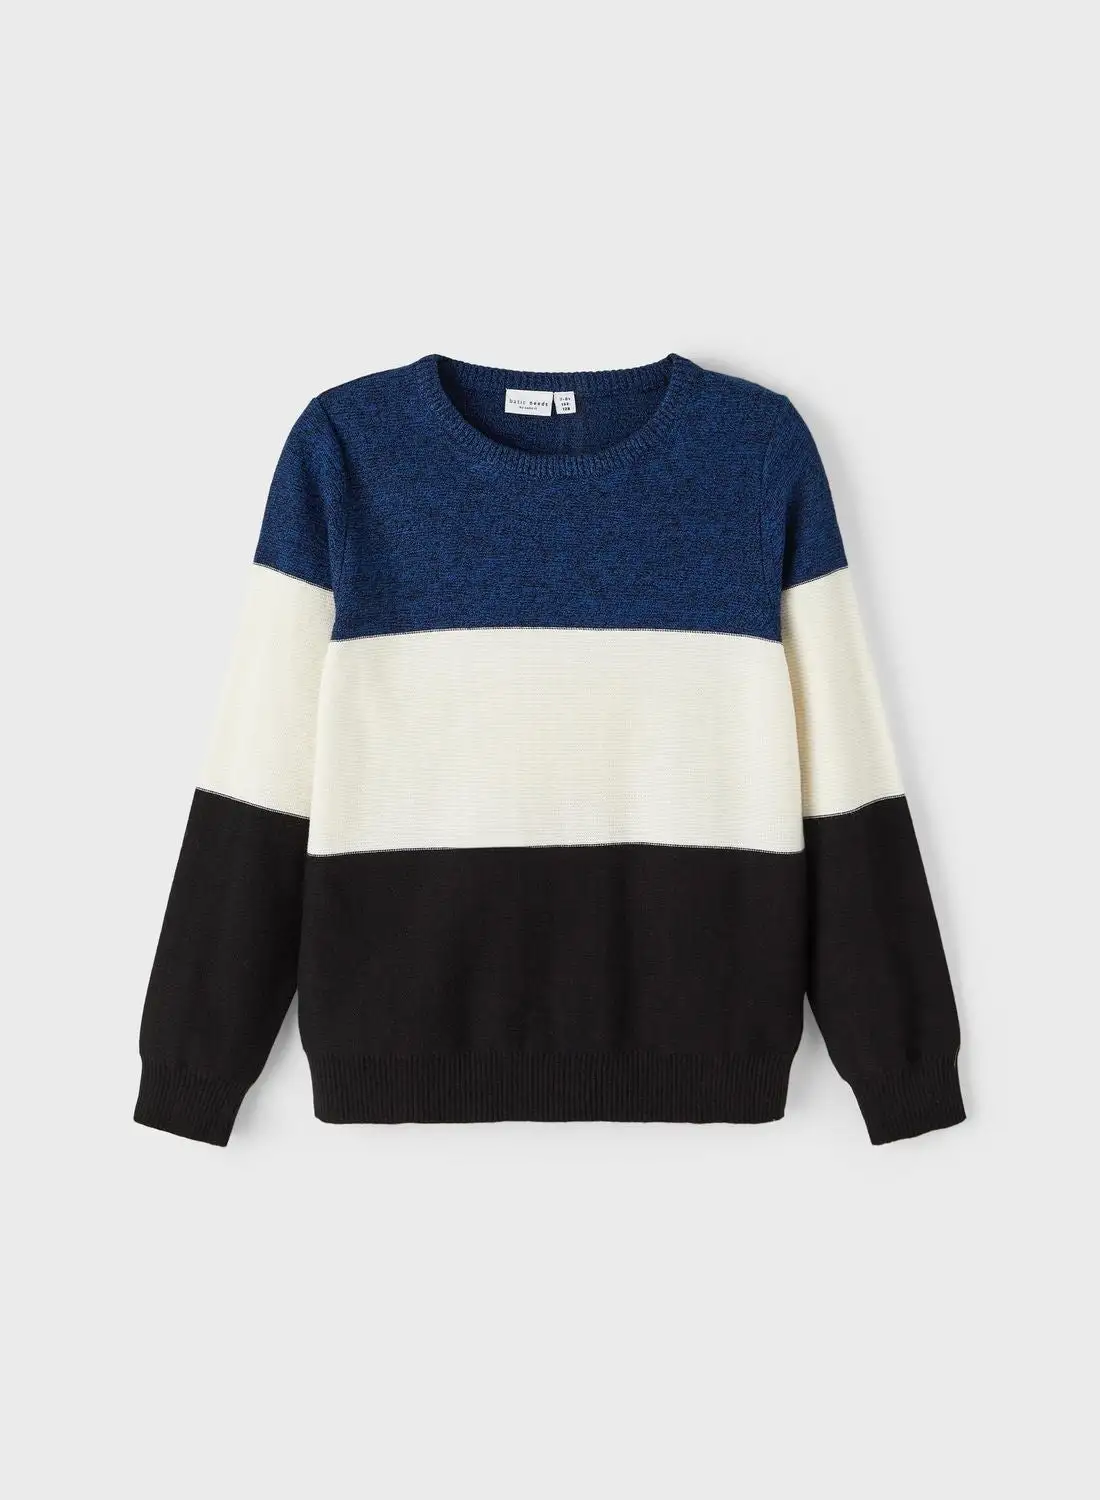 NAME IT Kids Color Block Sweater